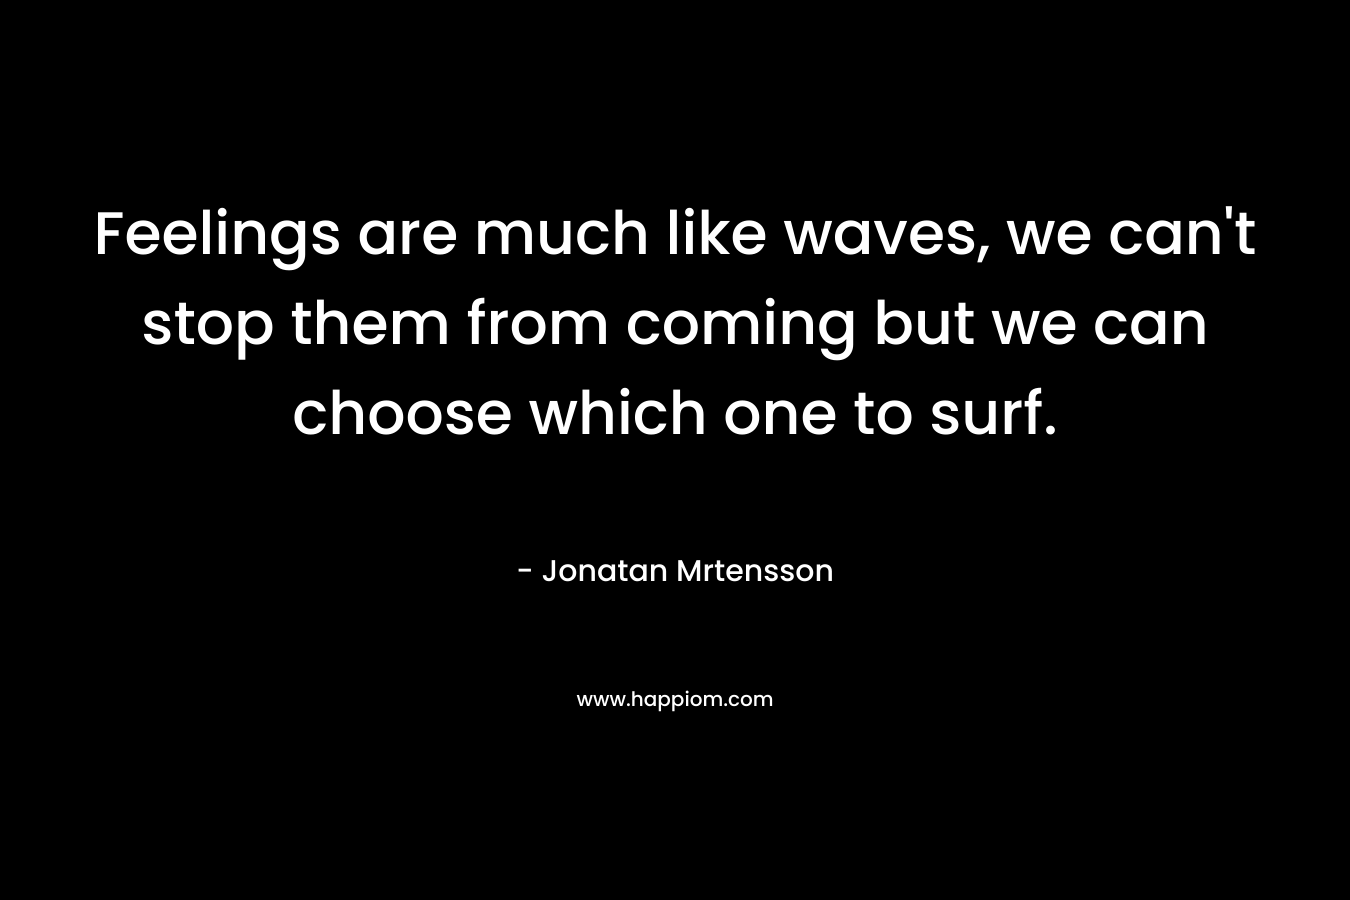 Feelings are much like waves, we can’t stop them from coming but we can choose which one to surf. – Jonatan Mrtensson